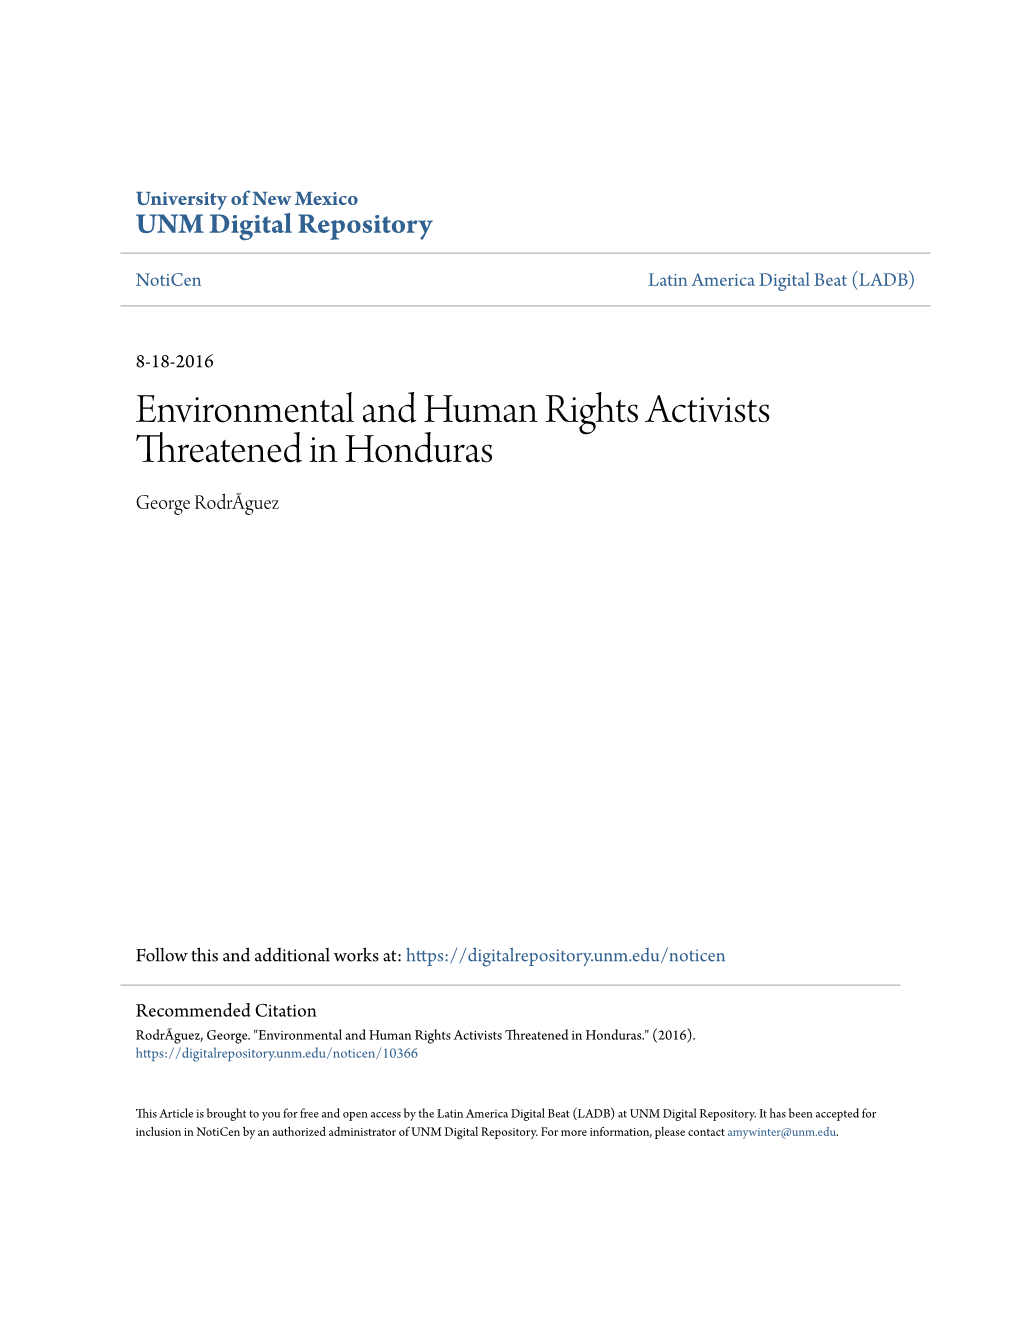 Environmental and Human Rights Activists Threatened in Honduras George Rodrãguez